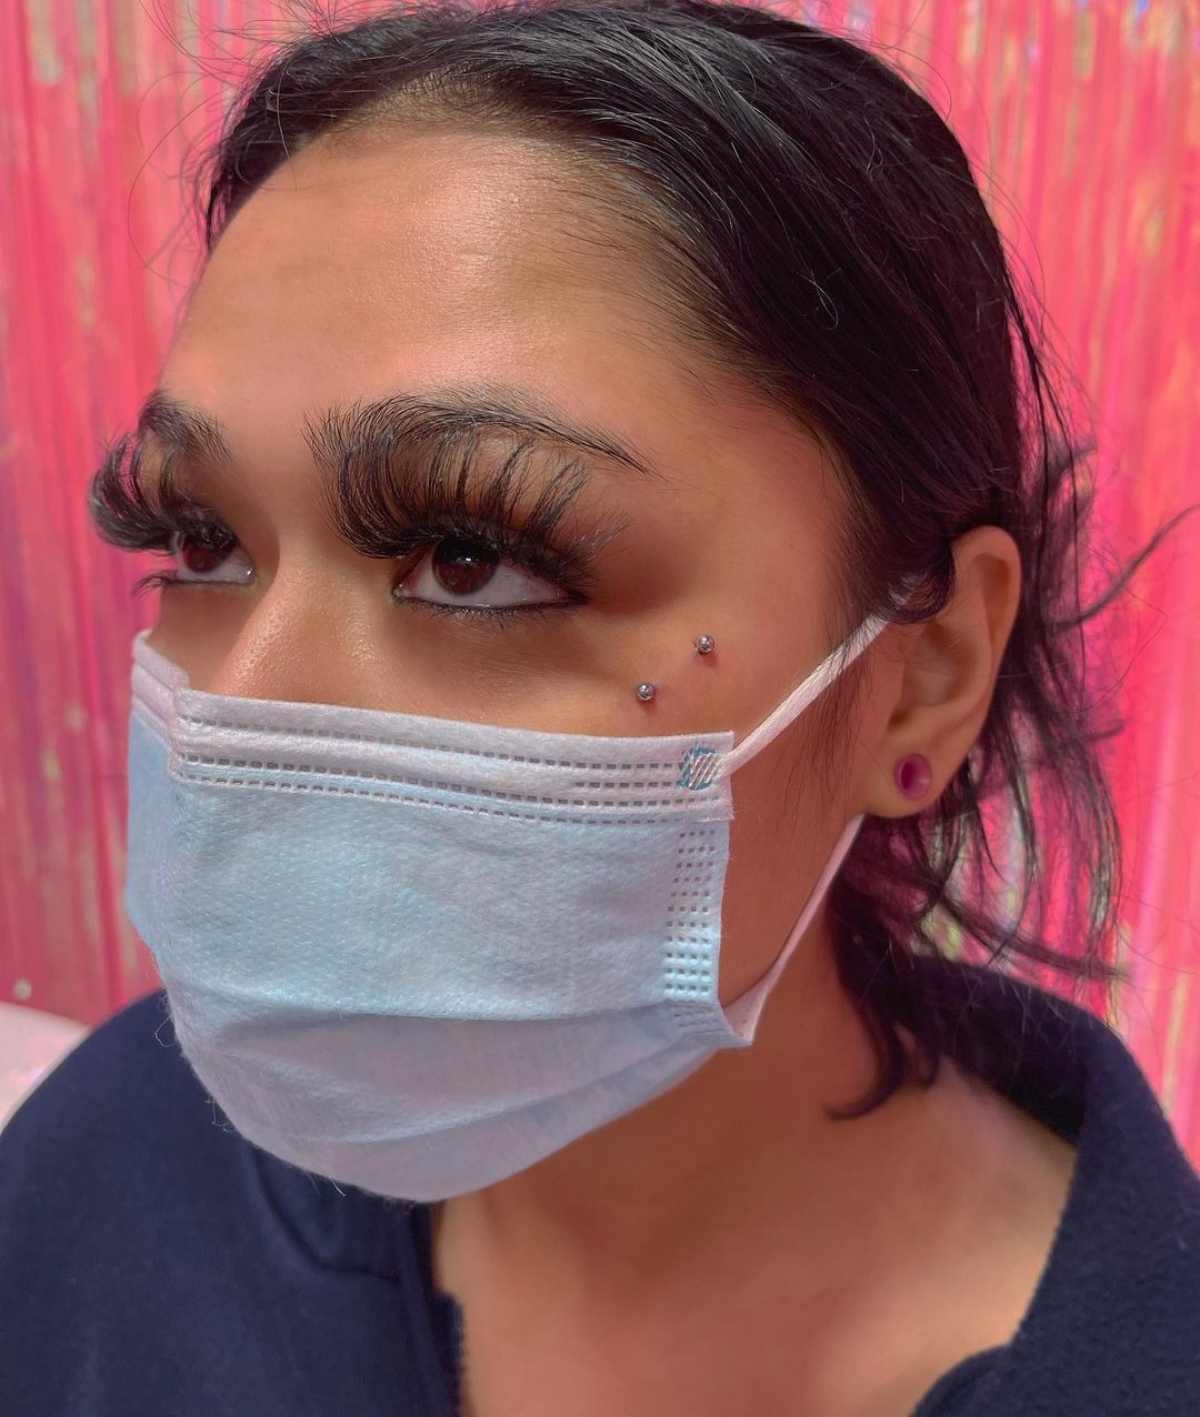 9 woman with mask lashes and face piercing